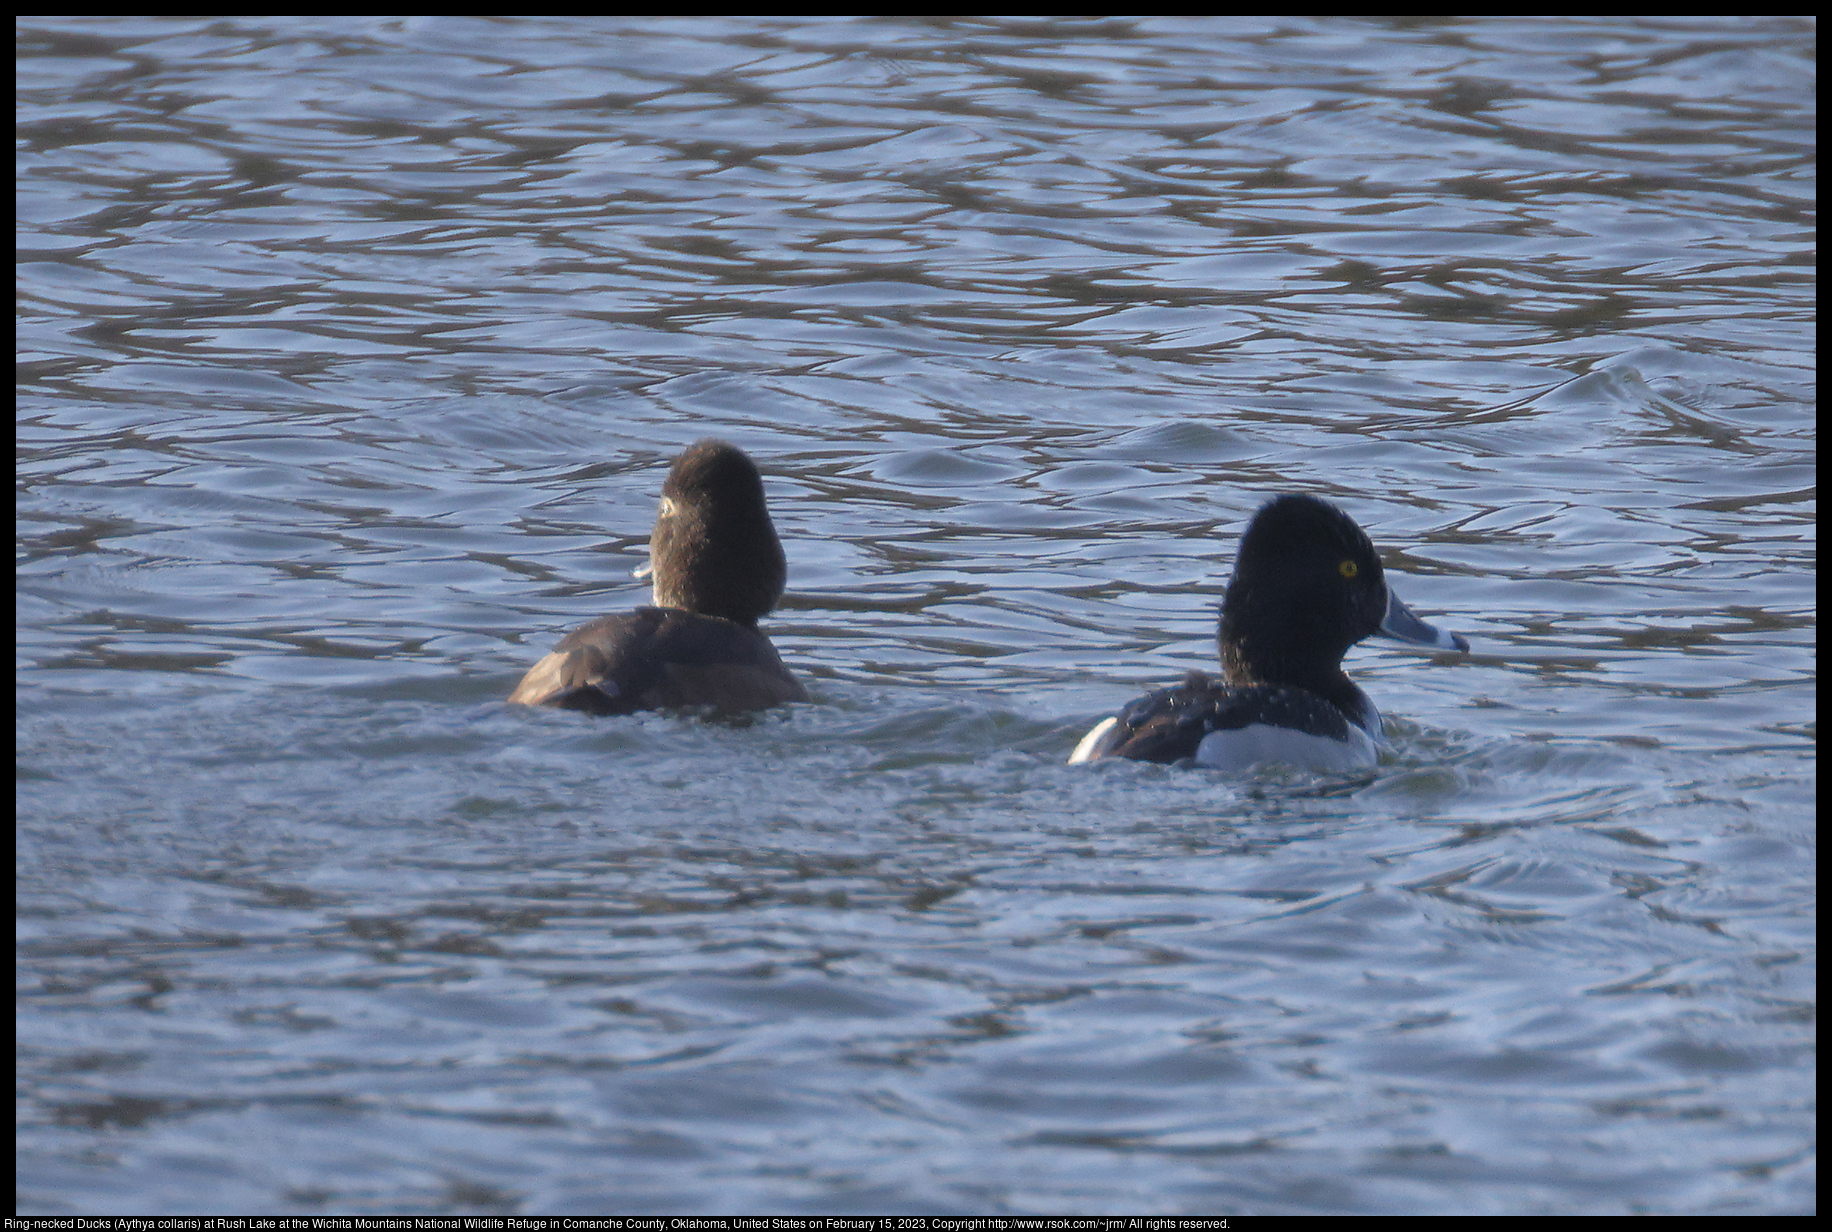 Ring-necked Ducks (Aythya collaris) at Rush Lake at the Wichita Mountains National Wildlife Refuge in Comanche County, Oklahoma, United States on February 15, 2023